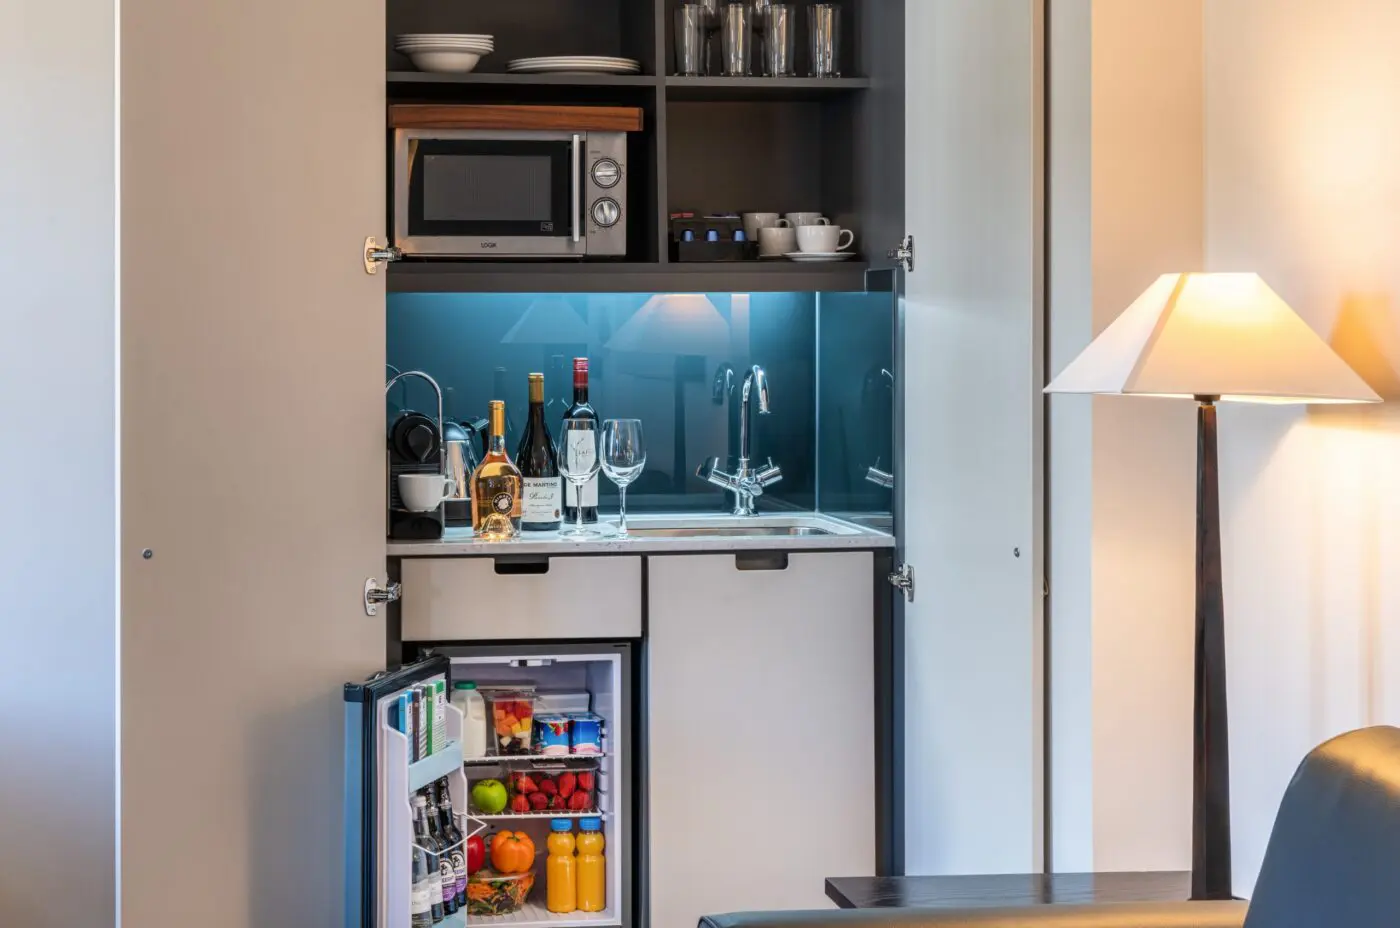 A built in miniature kitchen area with a fridge and microwave, located in Soho.